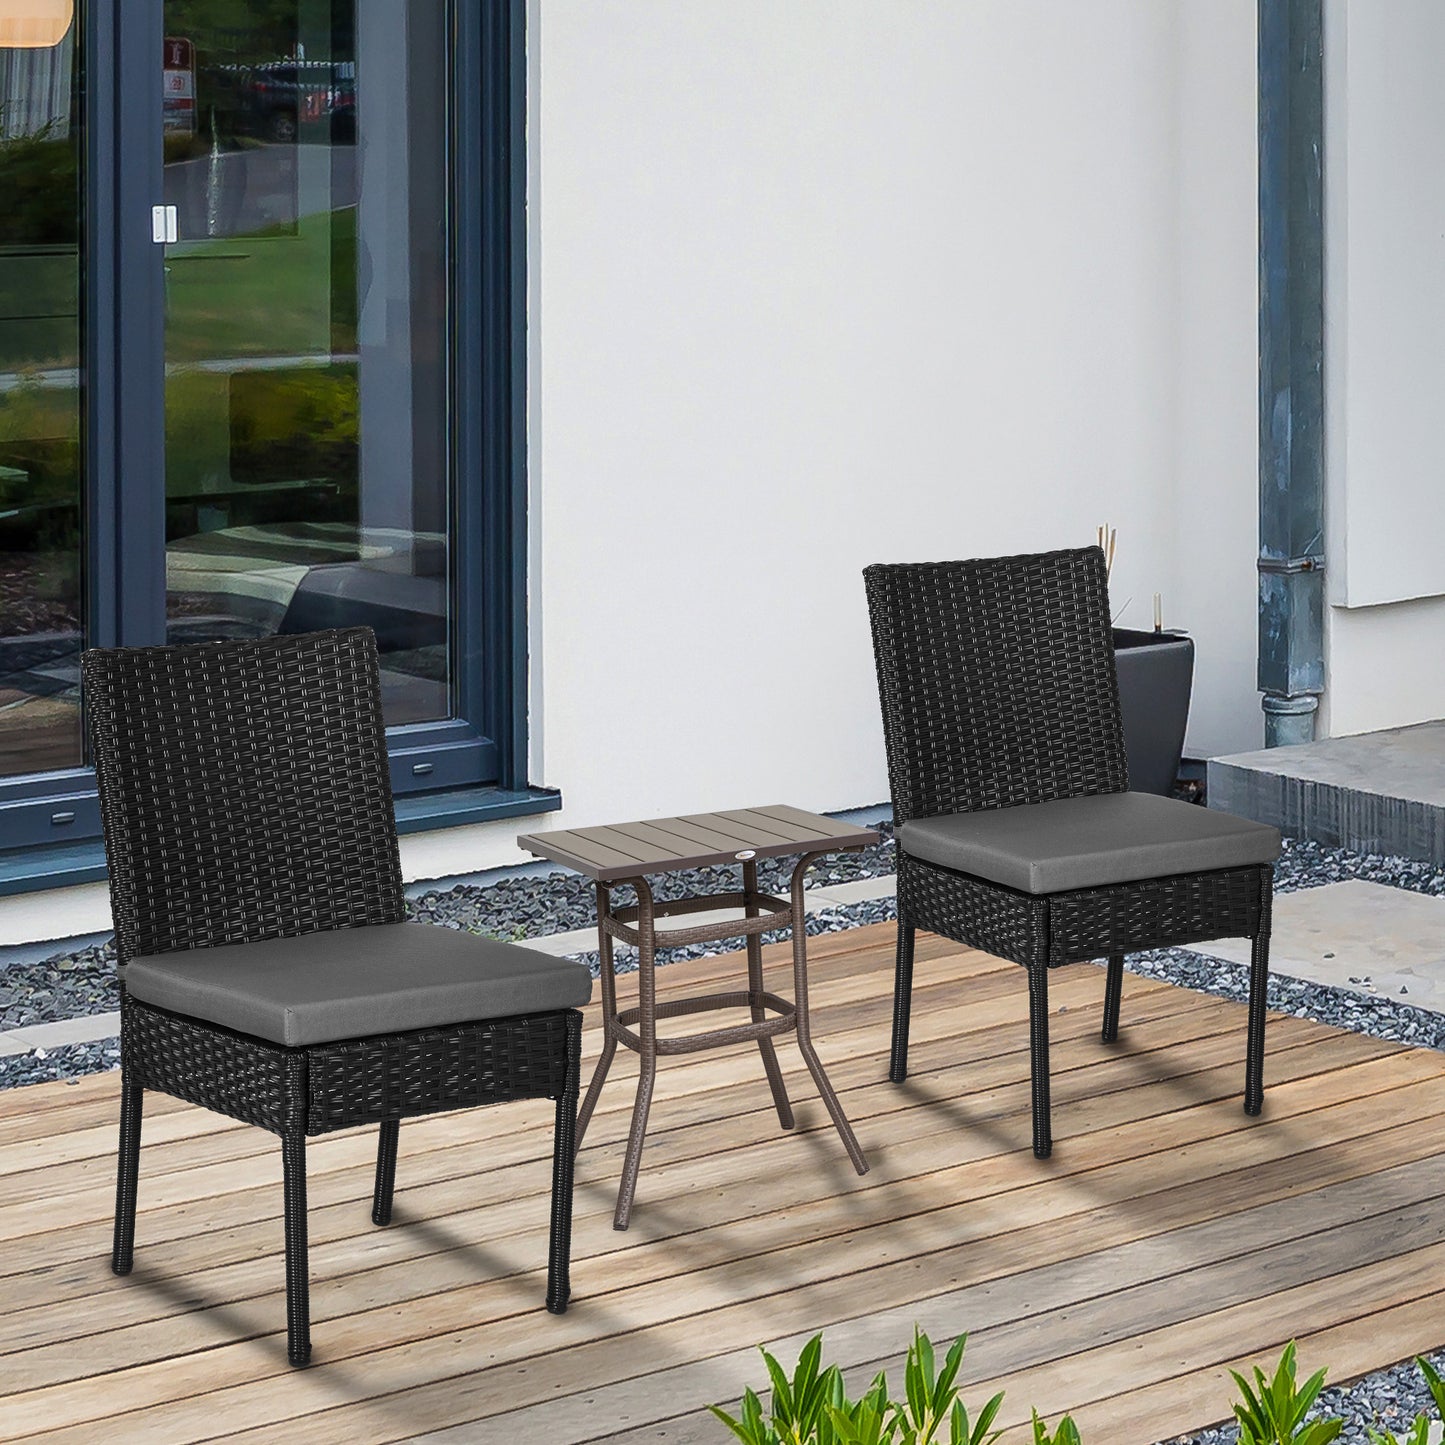 Outsunny Set of Two Armless Rattan Garden Chairs - Black